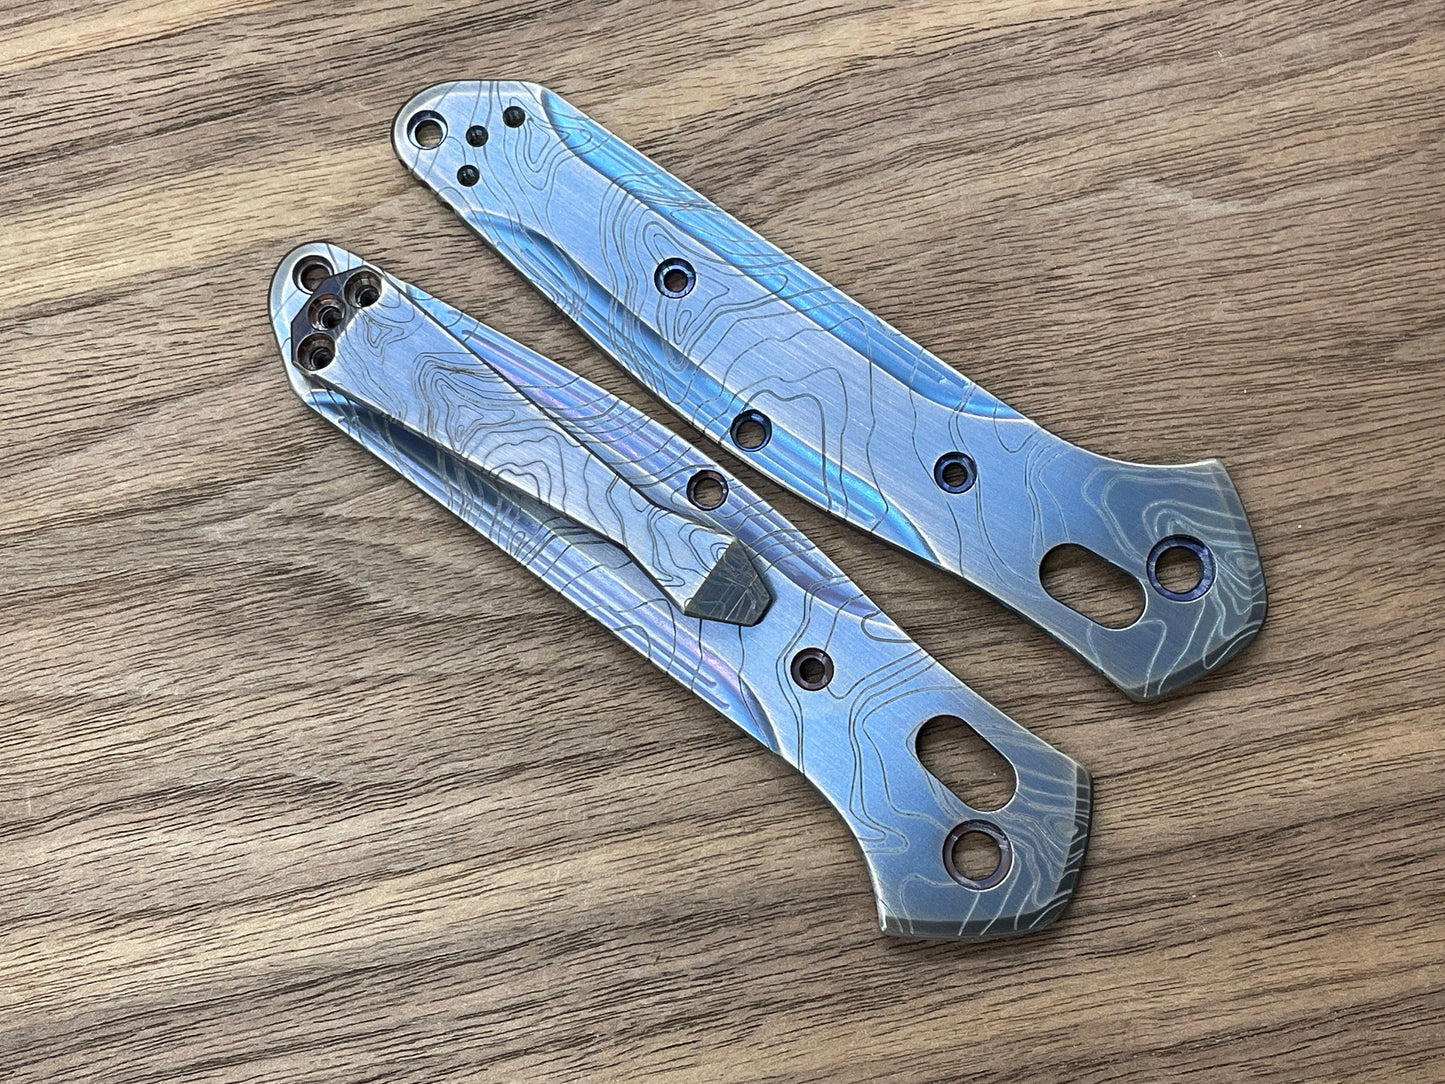 TOPO Blue Ano Brushed Dmd Titanium CLIP for most Benchmade models